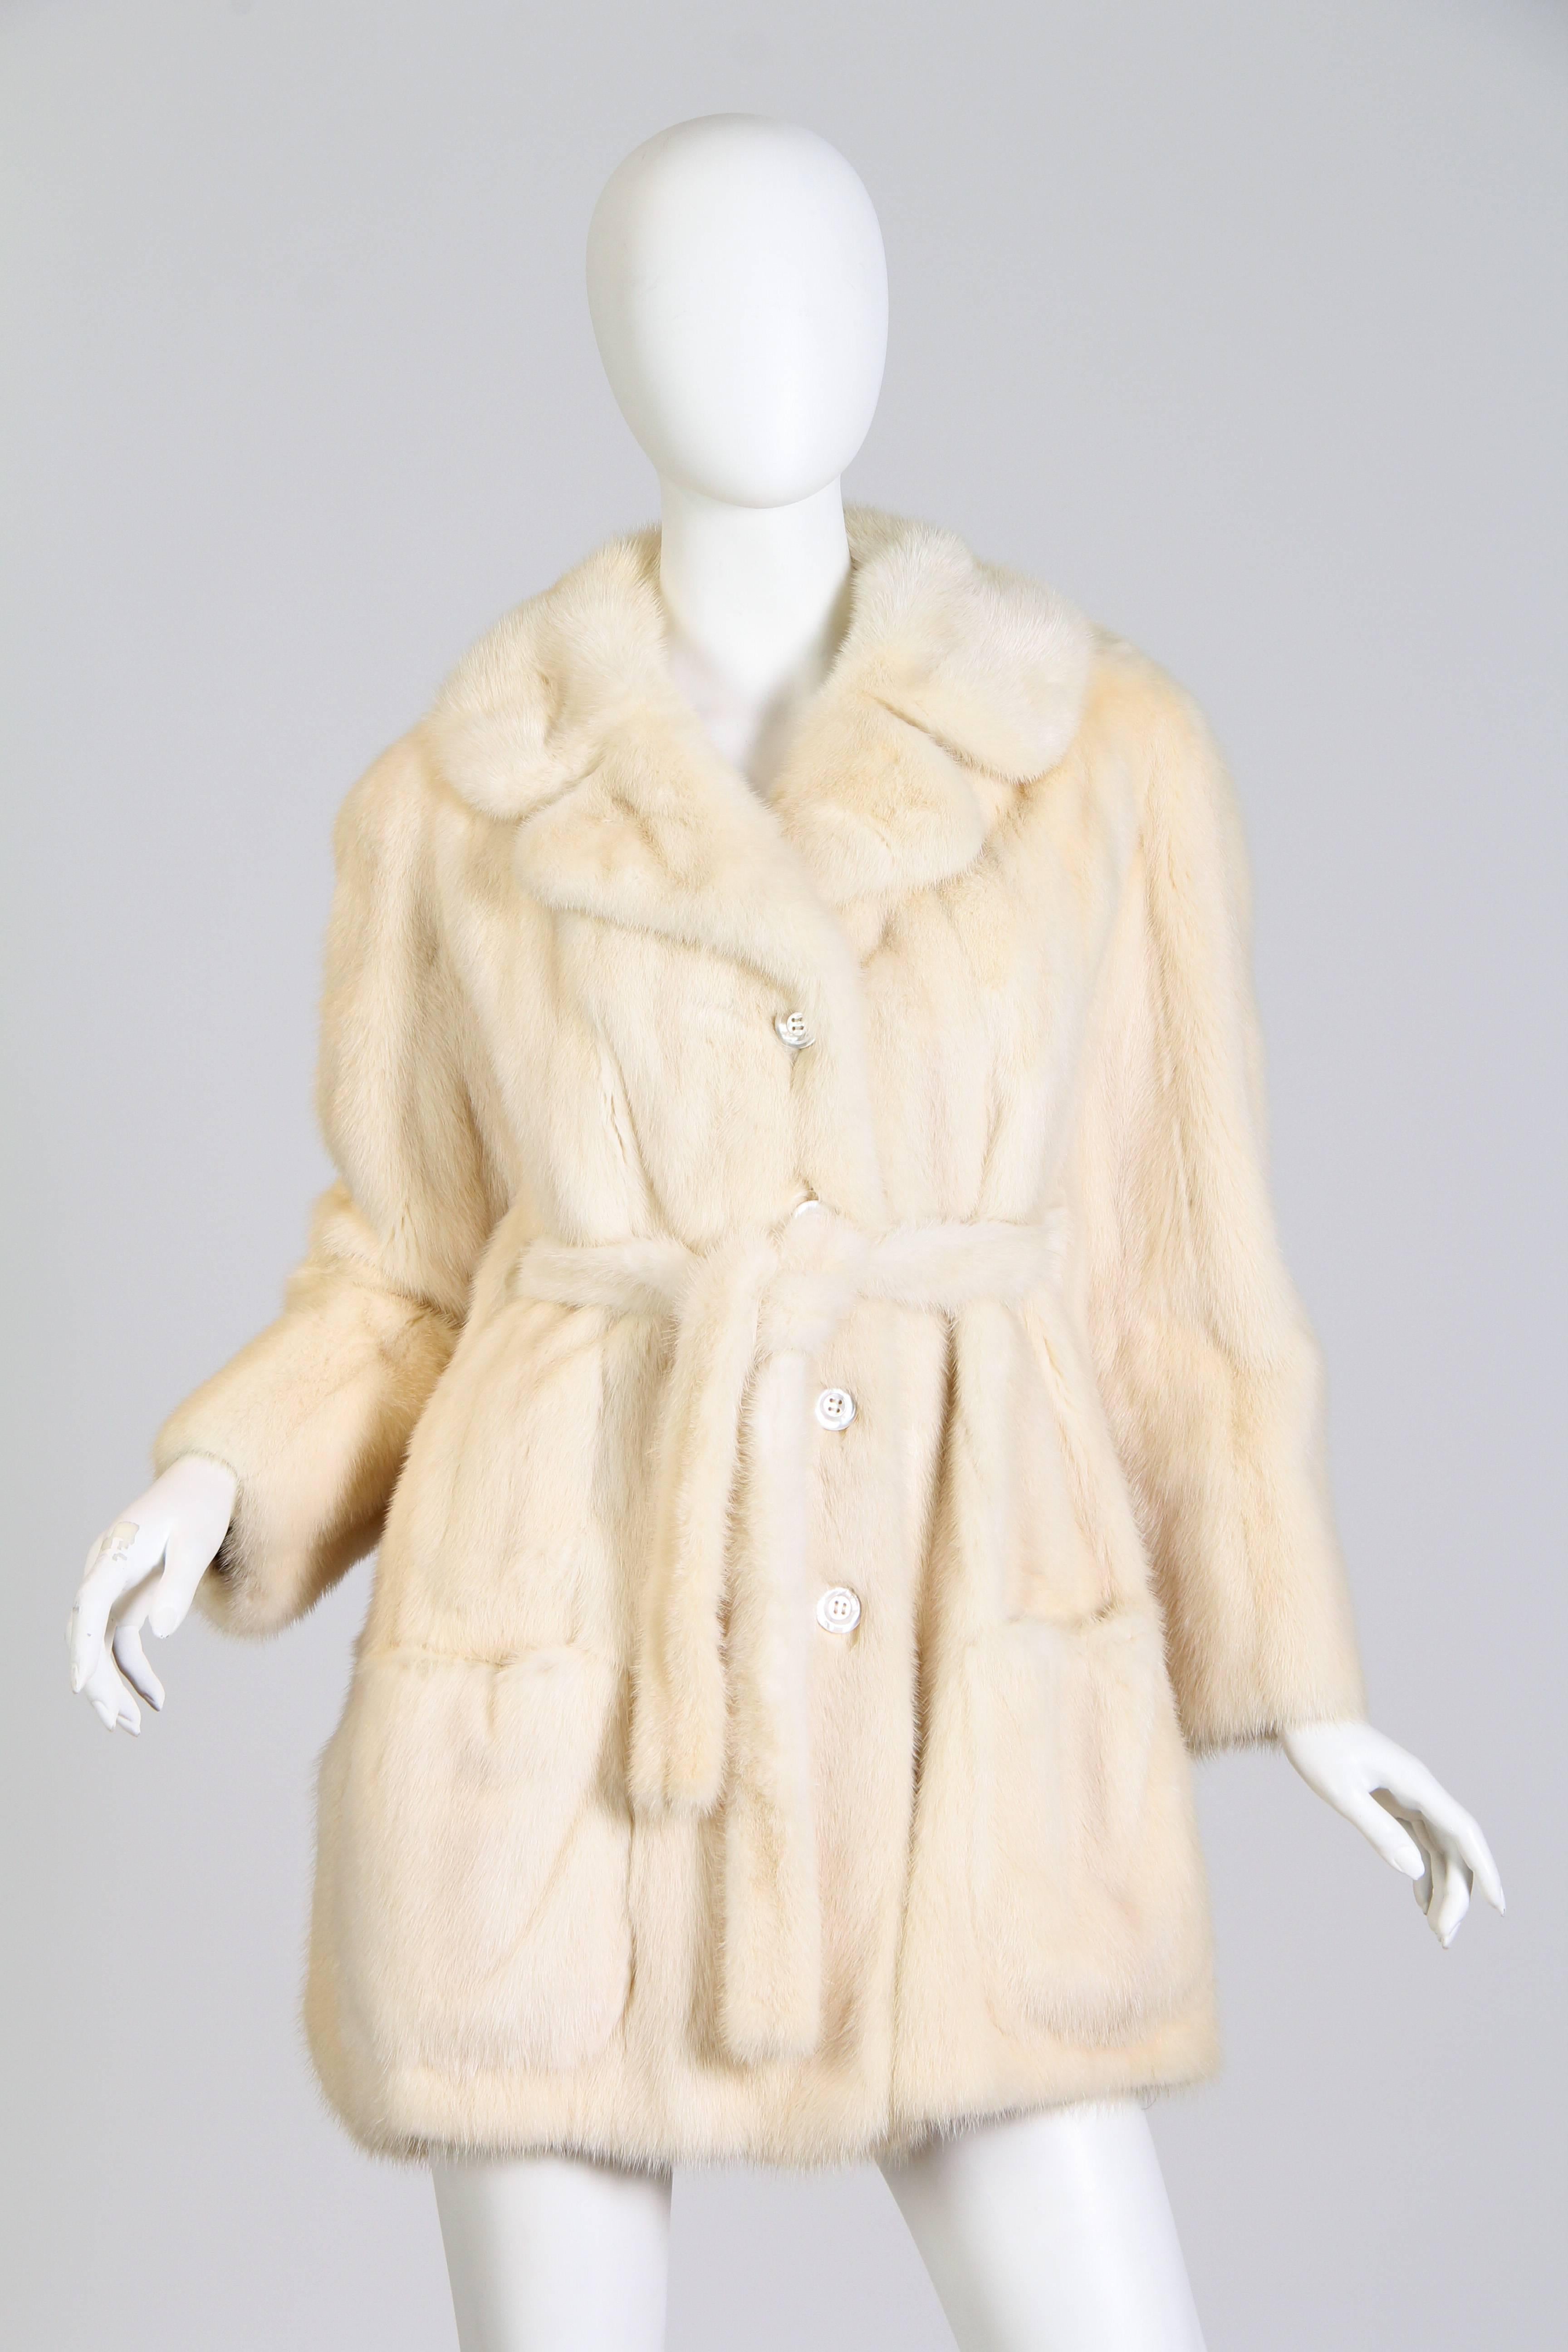 This is a beautiful mink fur coat by Bullocks Wilshire. The hip-length coat has a classic 1960/70s walker silhouette, with straight sleeves and a wide, deeply notched collar. Thick white mother of pearl buttons close up the front and large patch